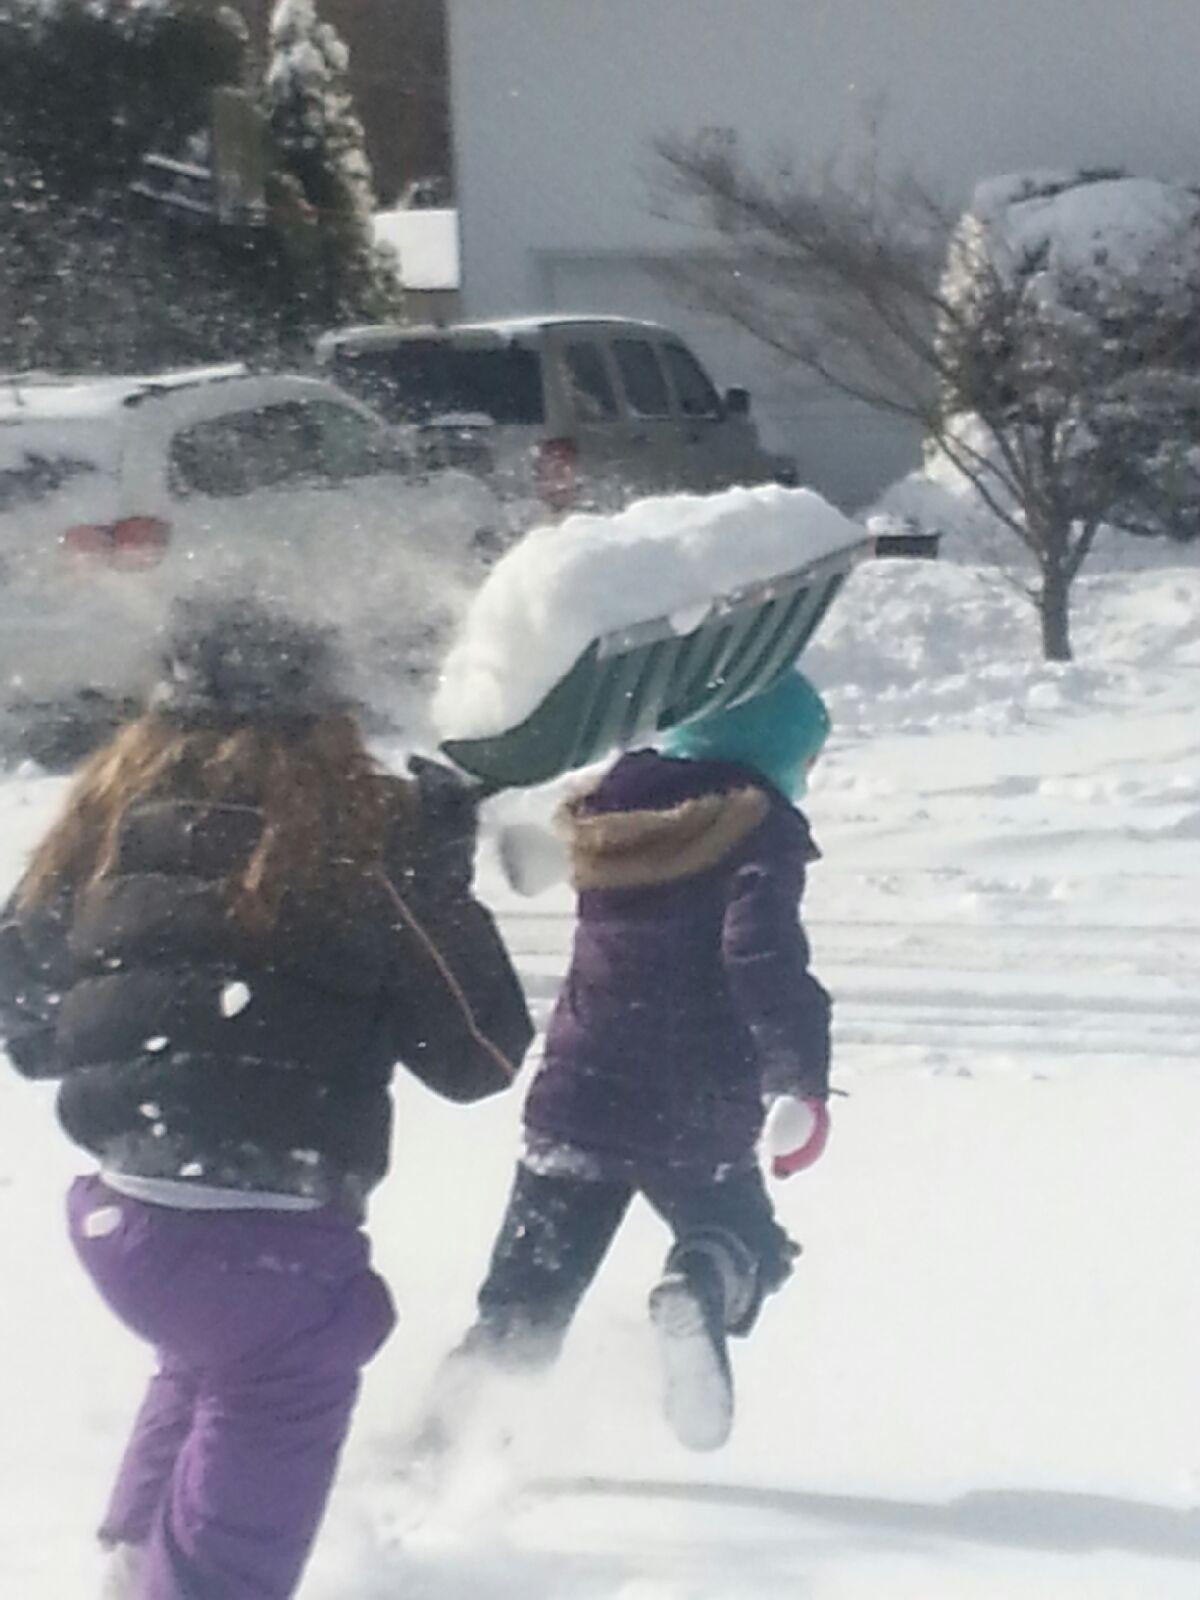 Abigail Pallotta ran for her life as her sister Alyssa tried to douse her with snow